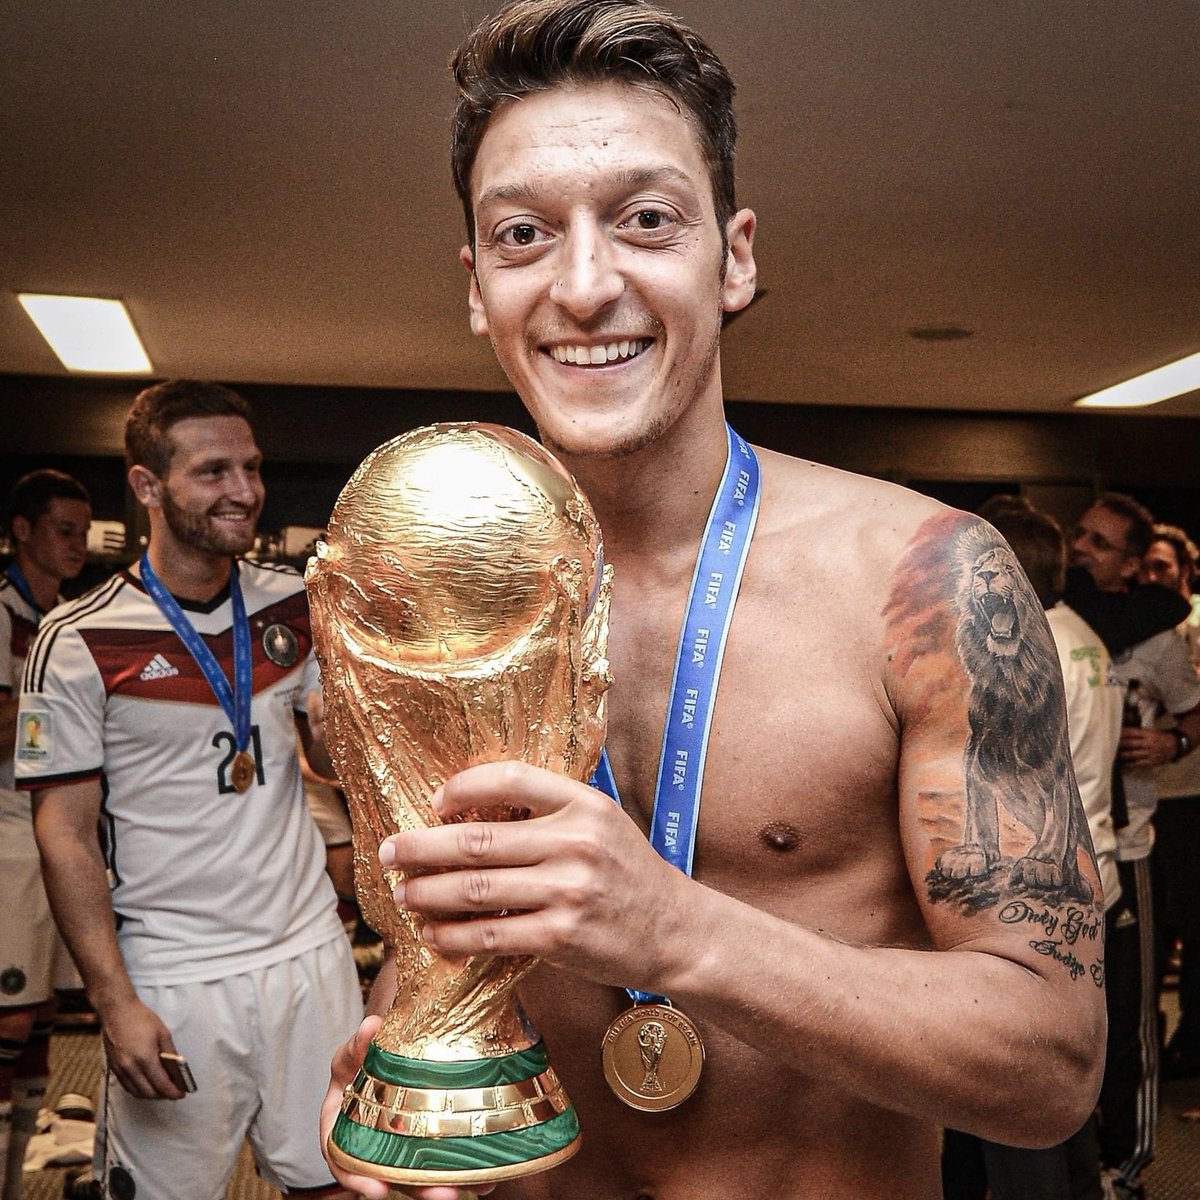 BREAKING: Mesut Ozil has officially retired from professional football at the age of 34. #Ozil #MesutOzil